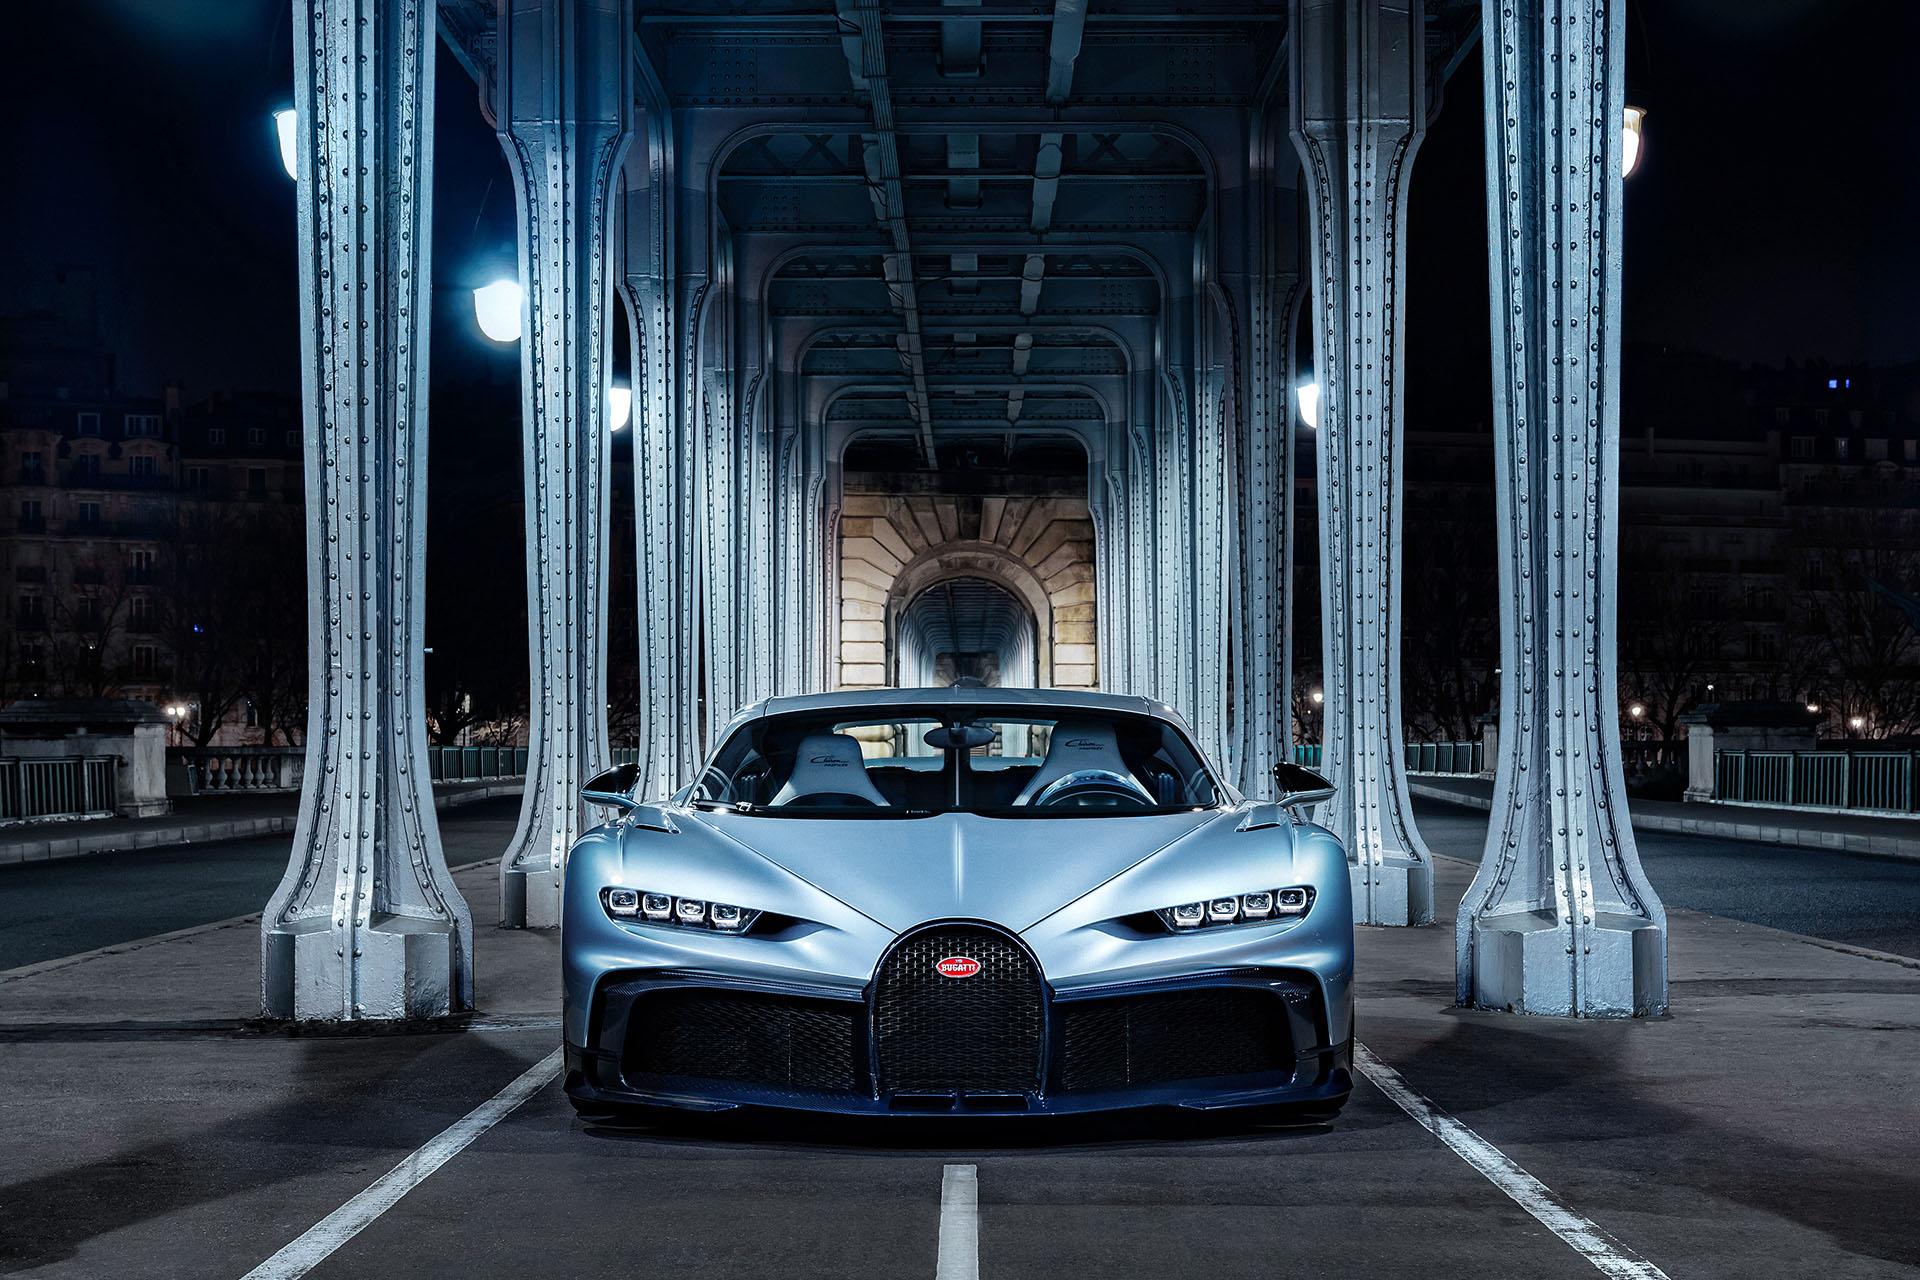 The Most Expensive New Car Ever Sold is a Bugatti